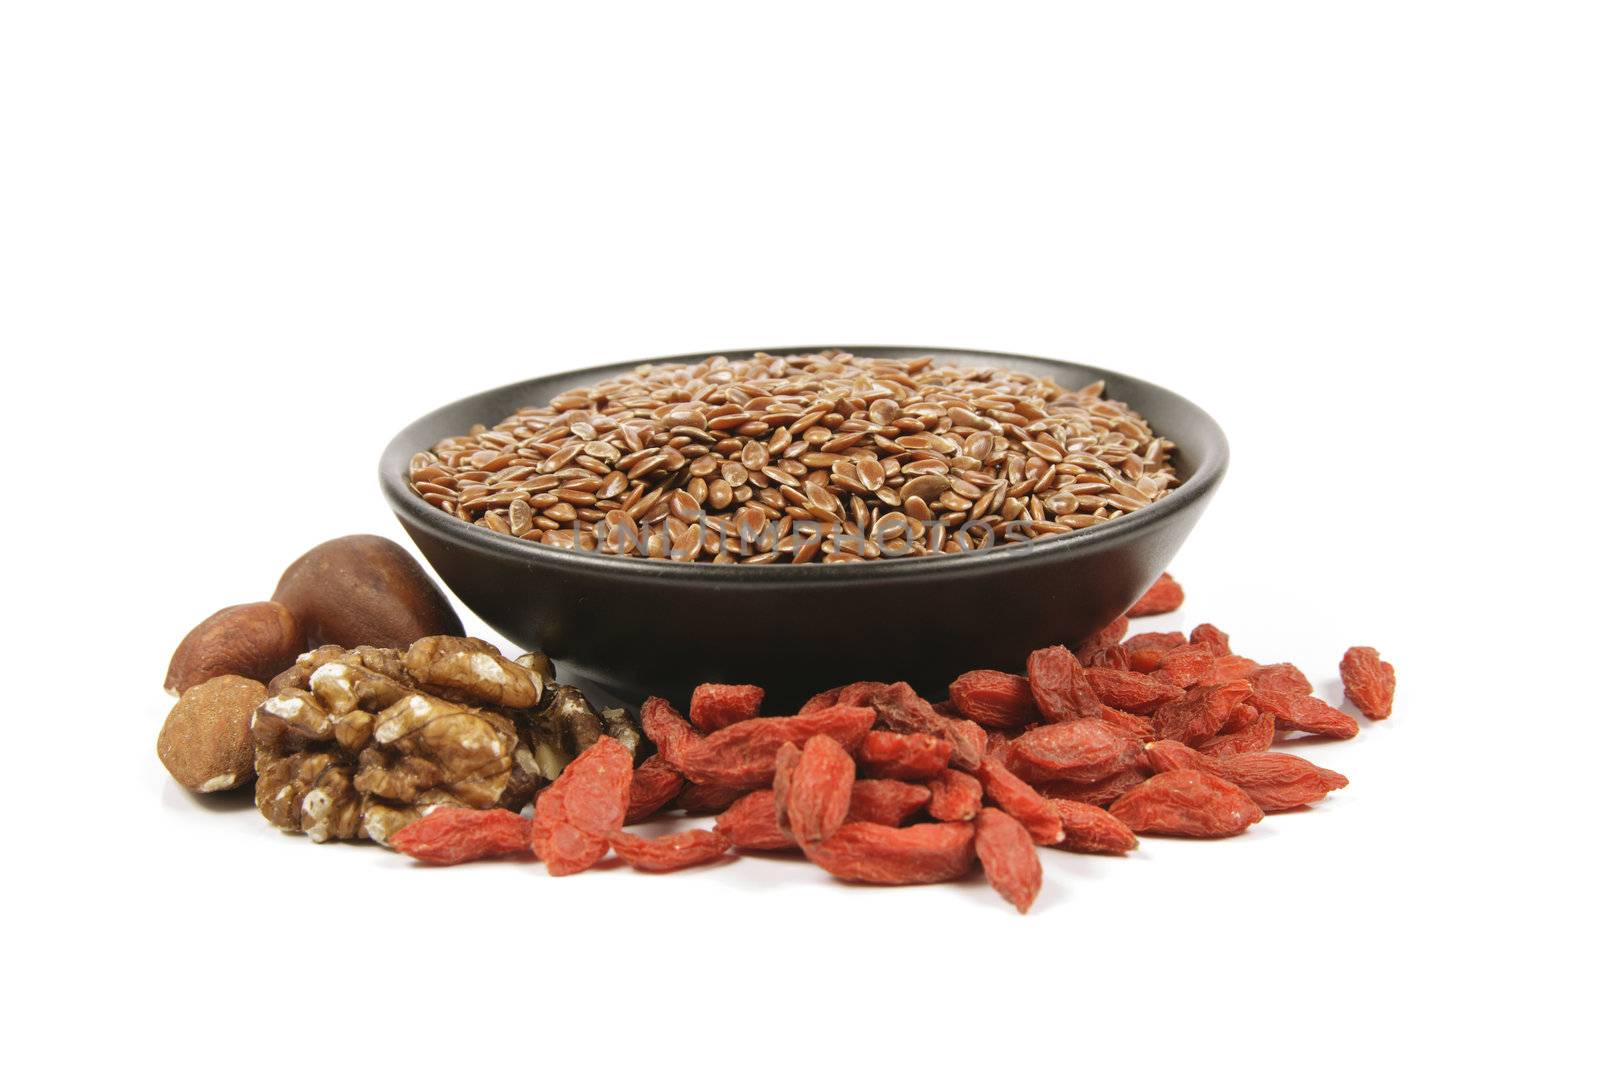 Brown linseed seeds in a small black bowl with mixed nuts and goji berries on a reflective white background